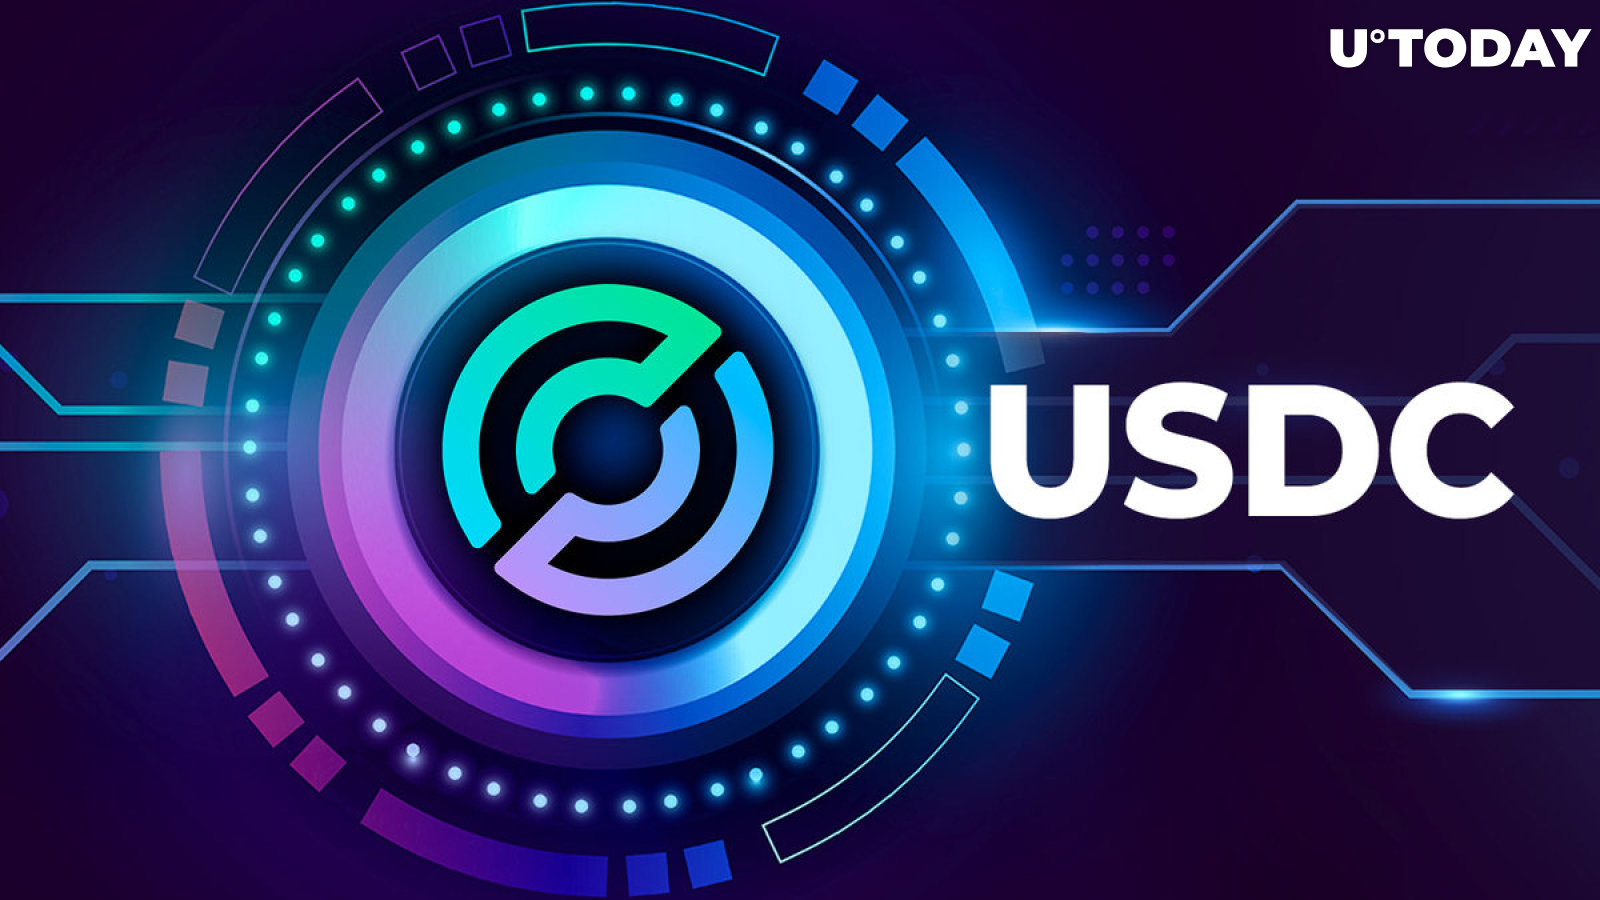 USD Coin (USDC) Stablecoin by Circle Kicks off on NEAR